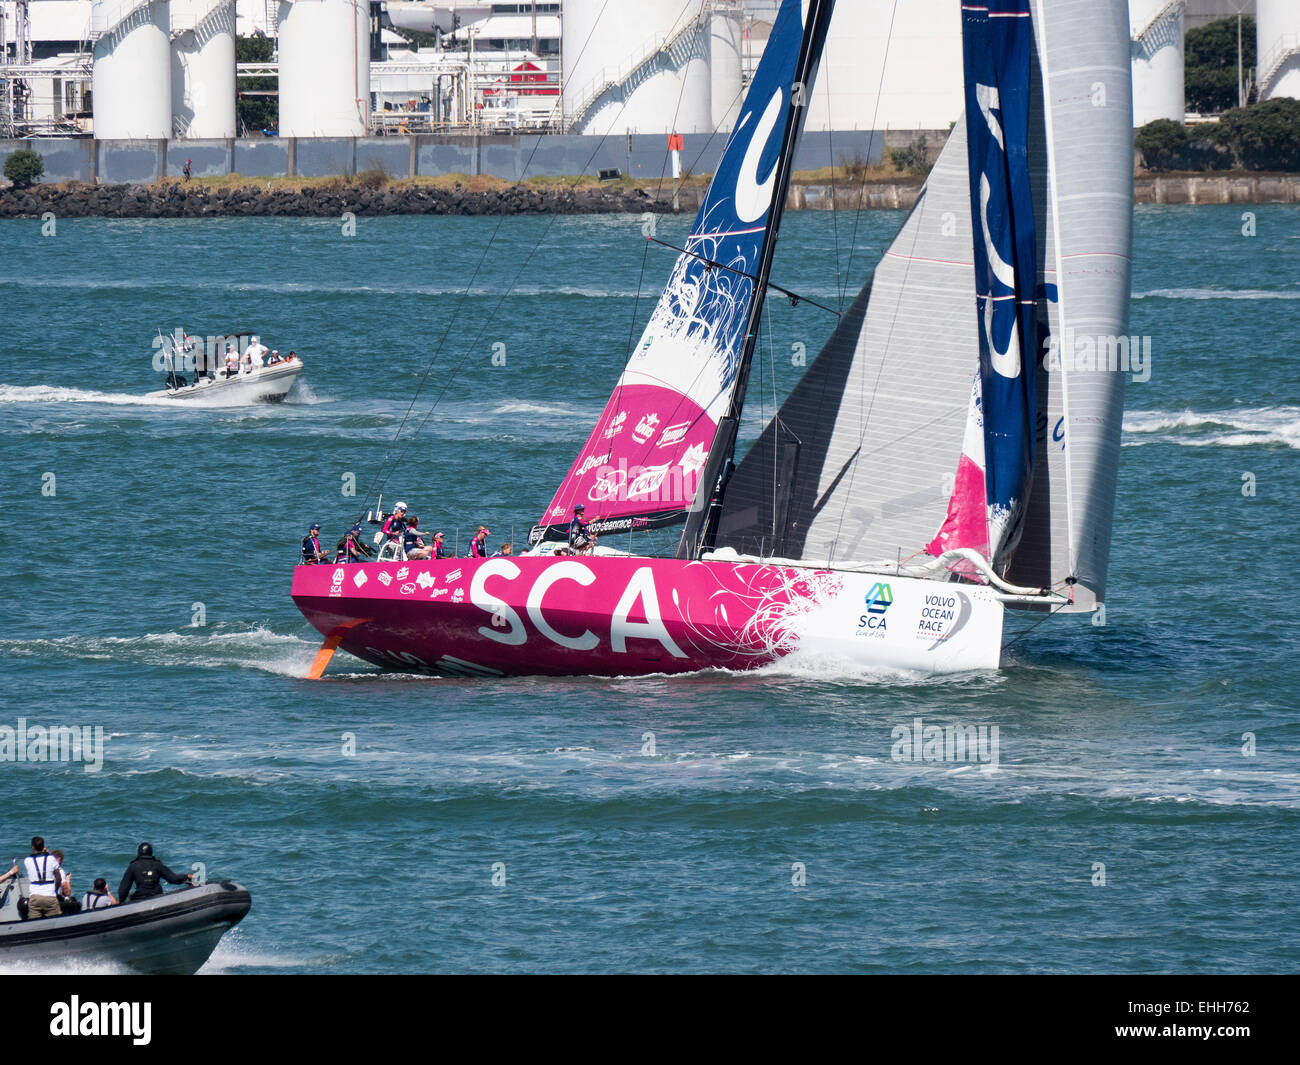 Auckland, New Zealand. 14th Mar, 2015. The all female Team SCA leads Team Brunei in the Auckland In-port race, part of the 2015 Volvo Ocean Race. The yachts include Team SCA, Team Brunel, Mapfre, Dongfeng Rave Team, Team Alvimedica and Abu Dhabi Ocean Racing. The all-female Team SCA won the race with Team Brunei in second place. Credit:  John Kershaw/Alamy Live News Stock Photo